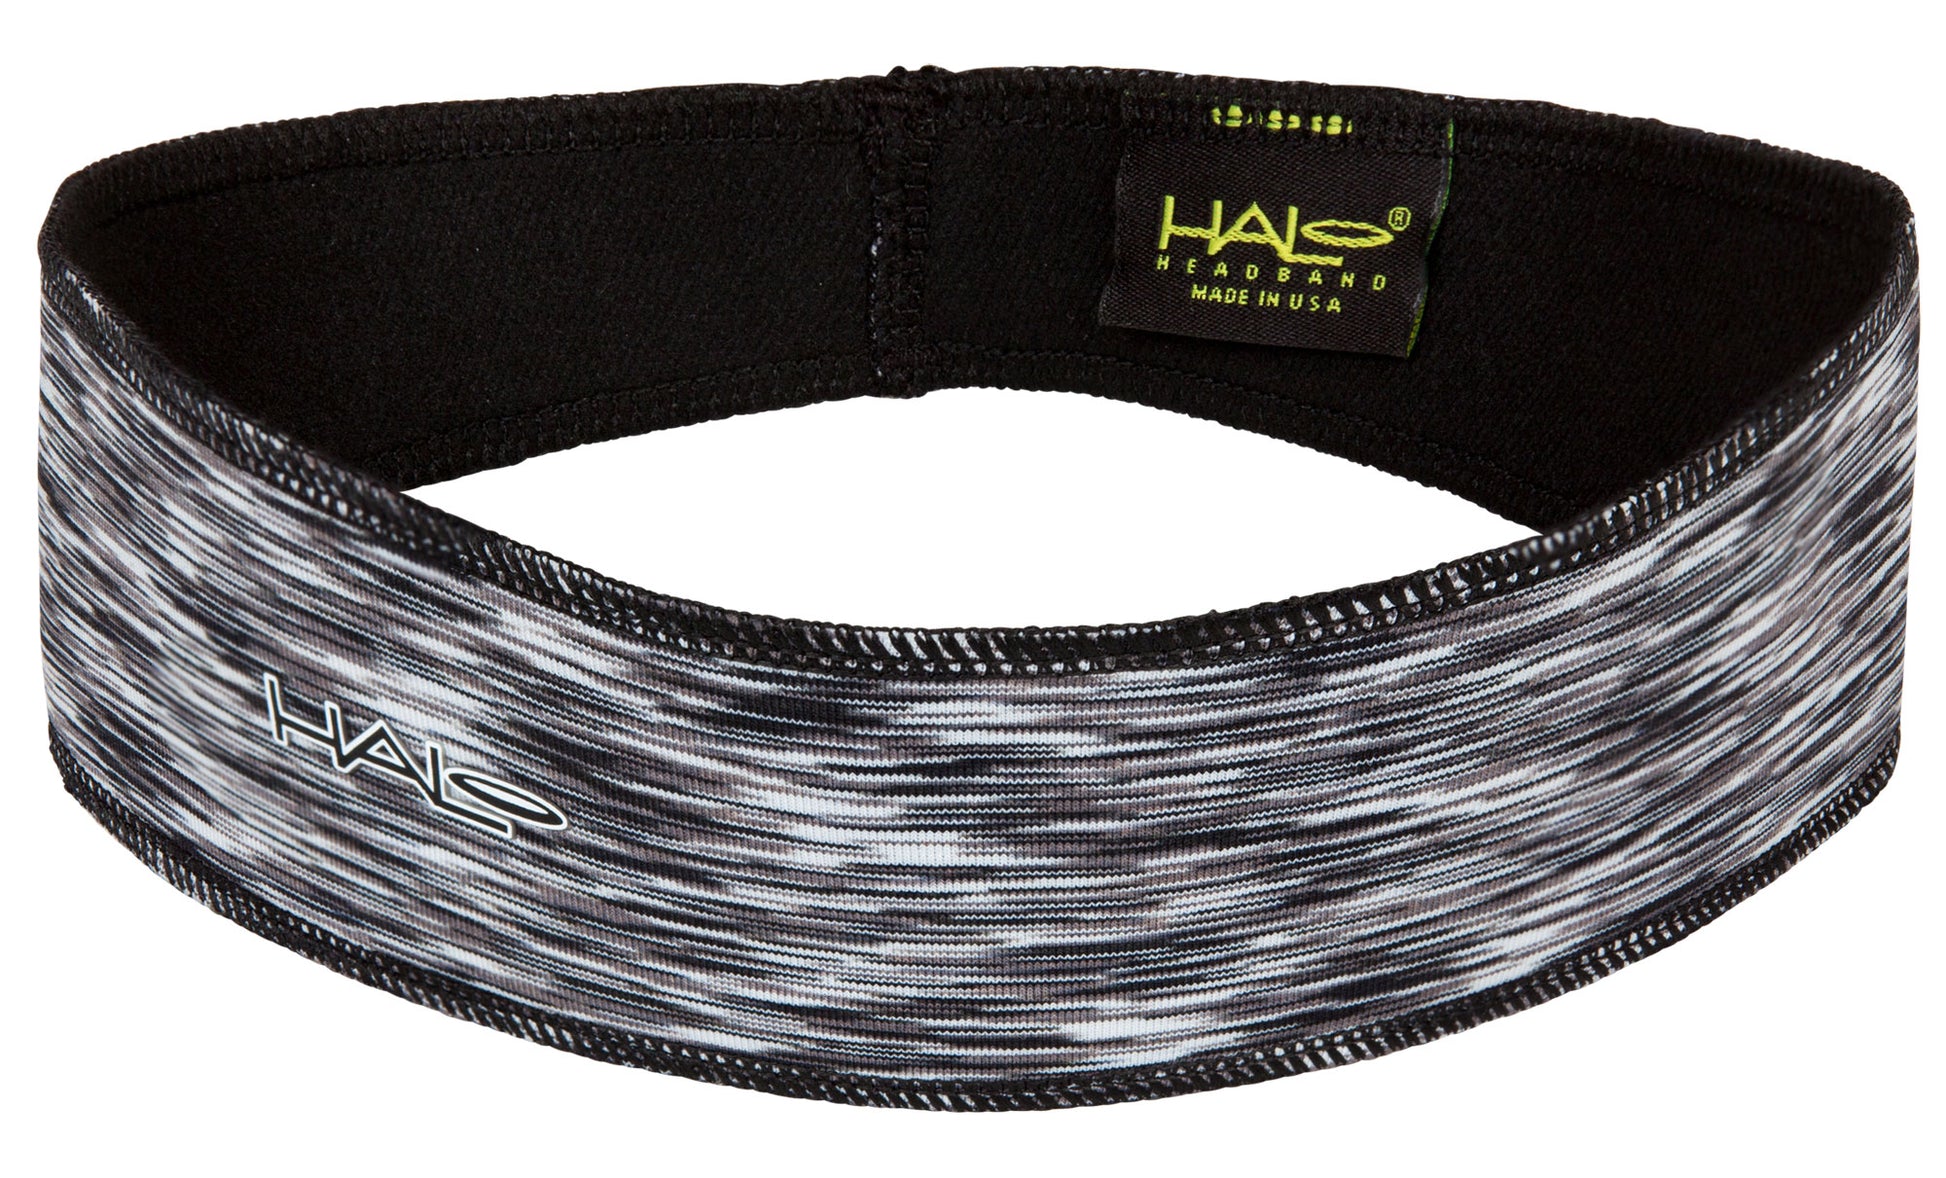 Halo II pull over Head band in night light